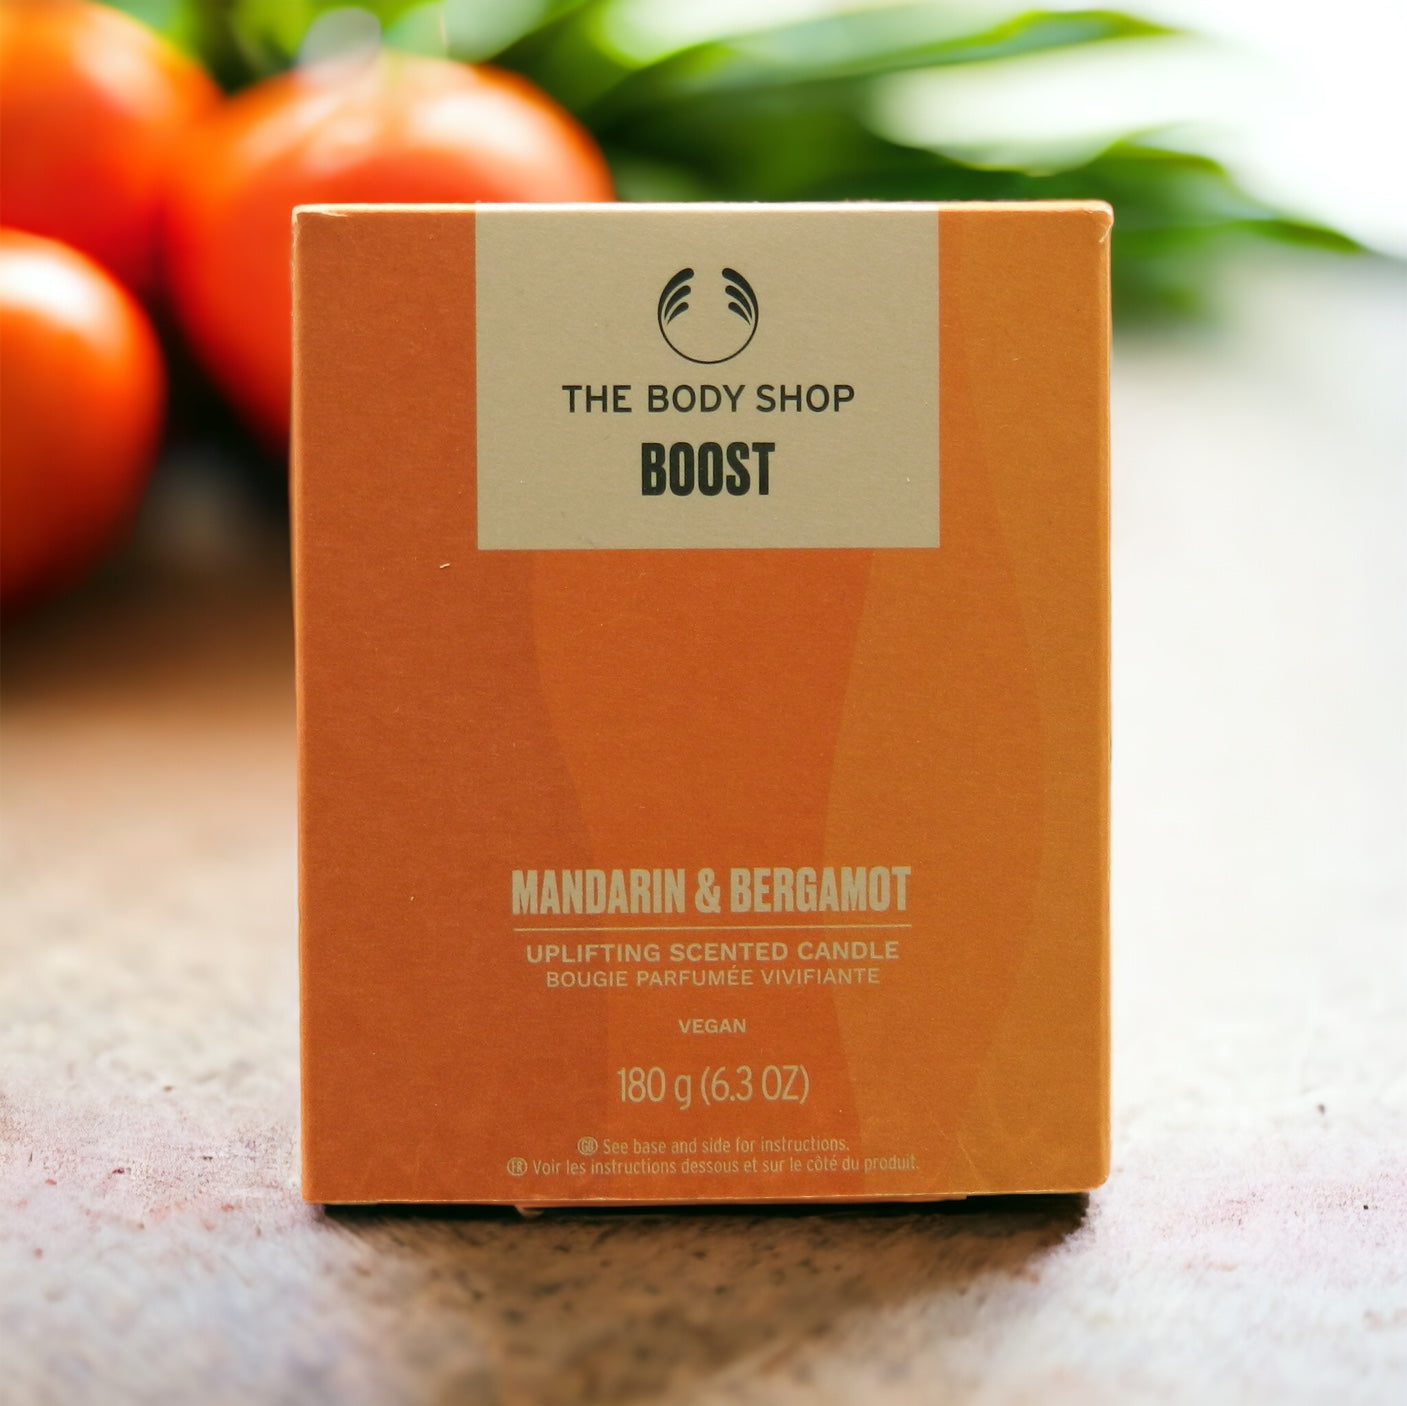 The Body Shop BOOST Uplifting Scented Candle